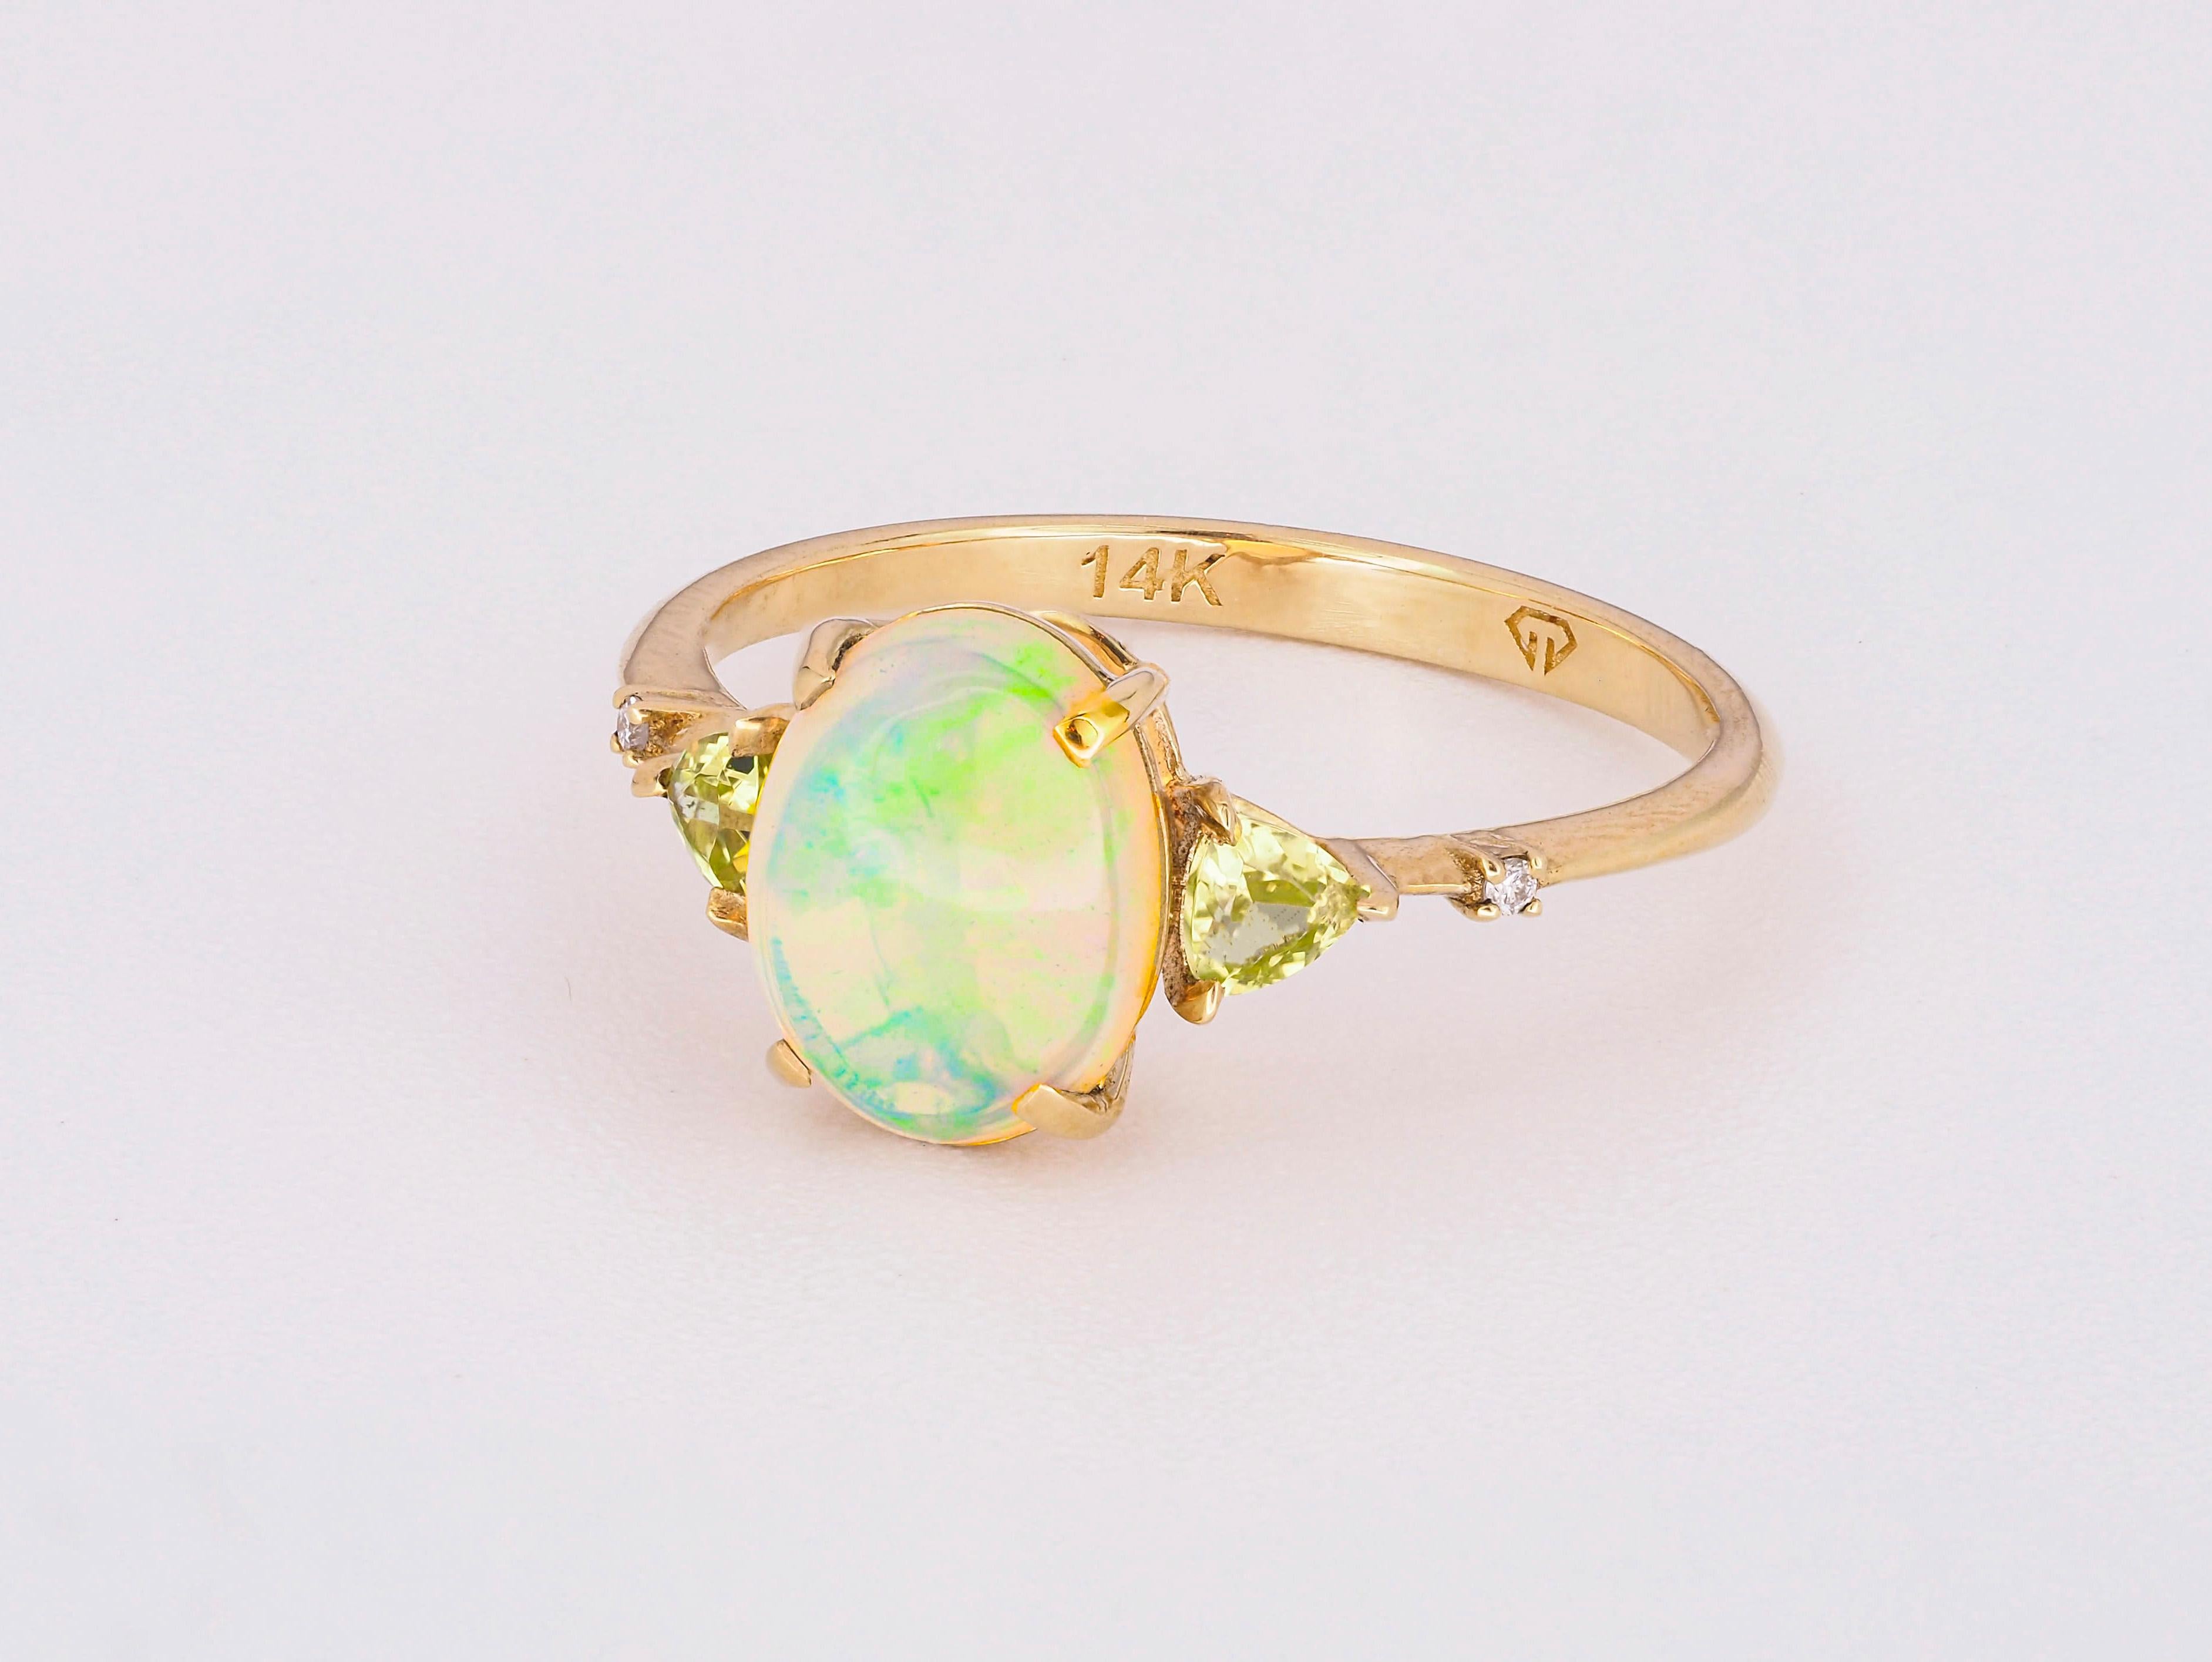 For Sale:  14k Gold Ring with Opal, Diamonds and Peridots 2